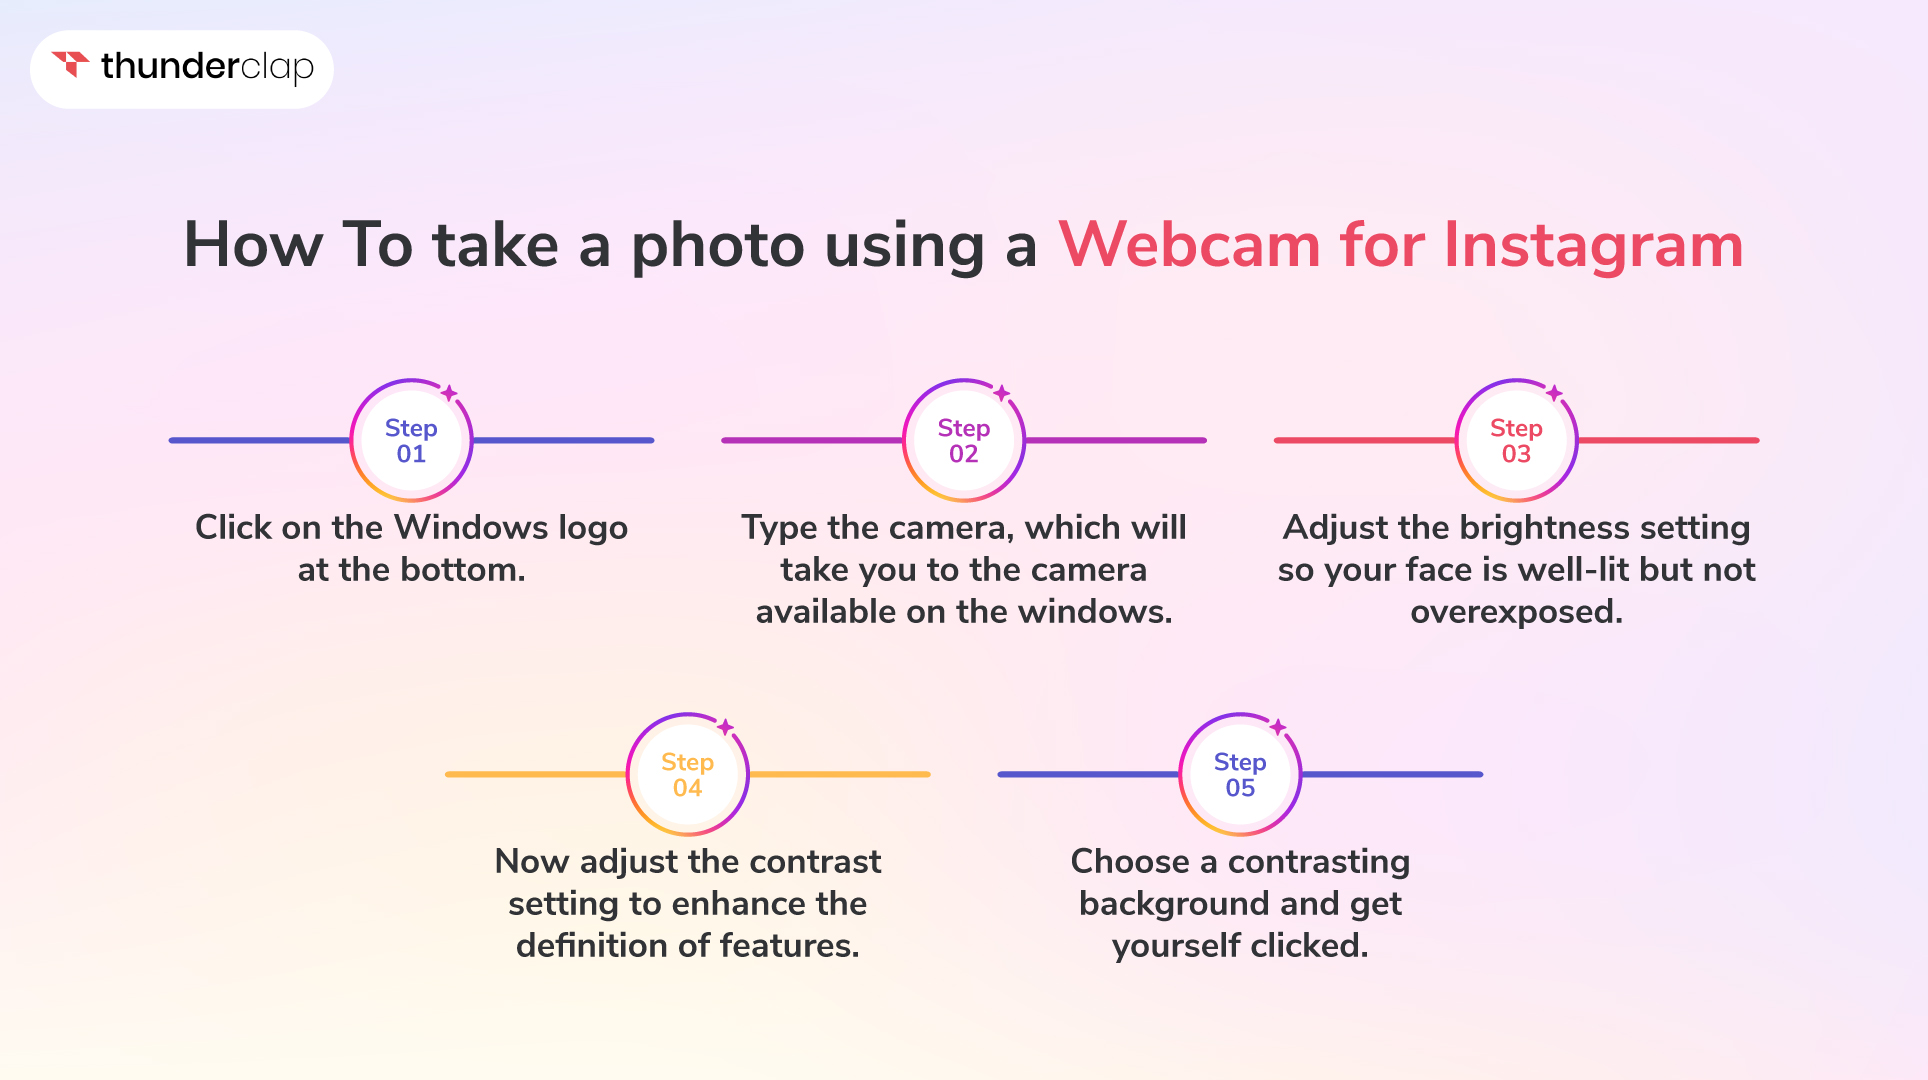 How To take a photo using a Webcam for Instagram